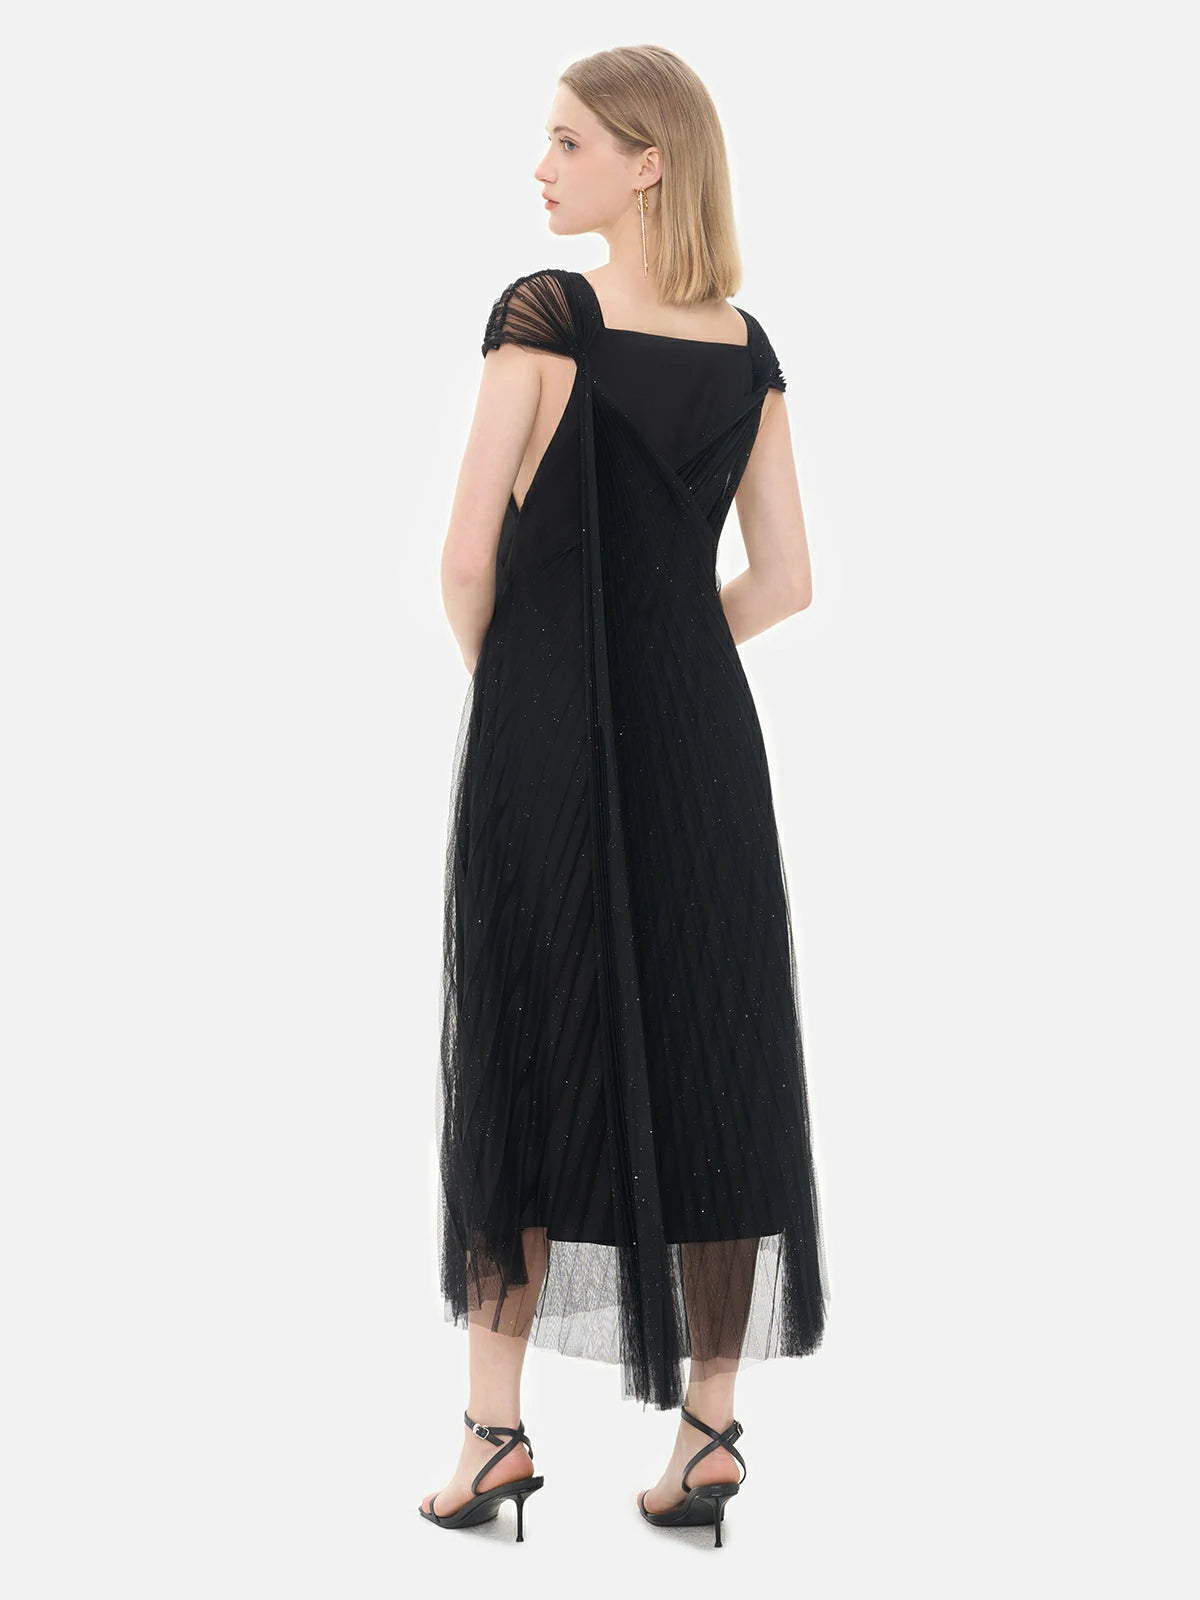 Classic black dress with a stylish twist - crisscross pleated mesh, cap sleeves, and shimmering sequins, ideal for special occasions.